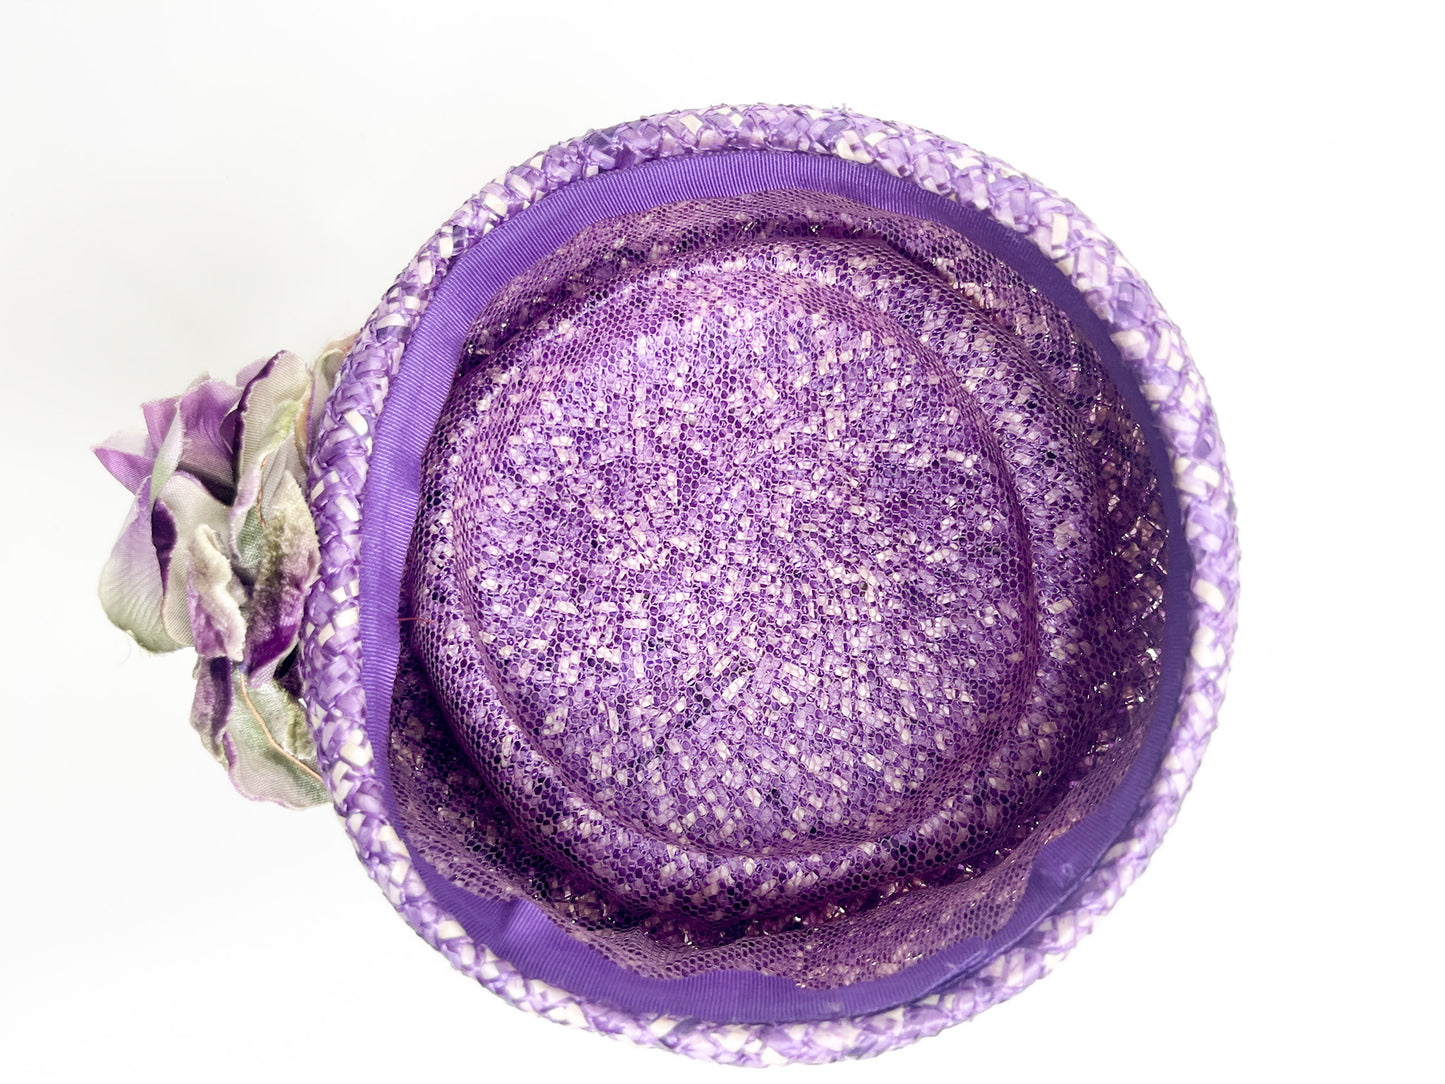 Purple Pill Box Hat with Floral detailing| Vintage Woven Pill box hat | 1960s Rounded Hat